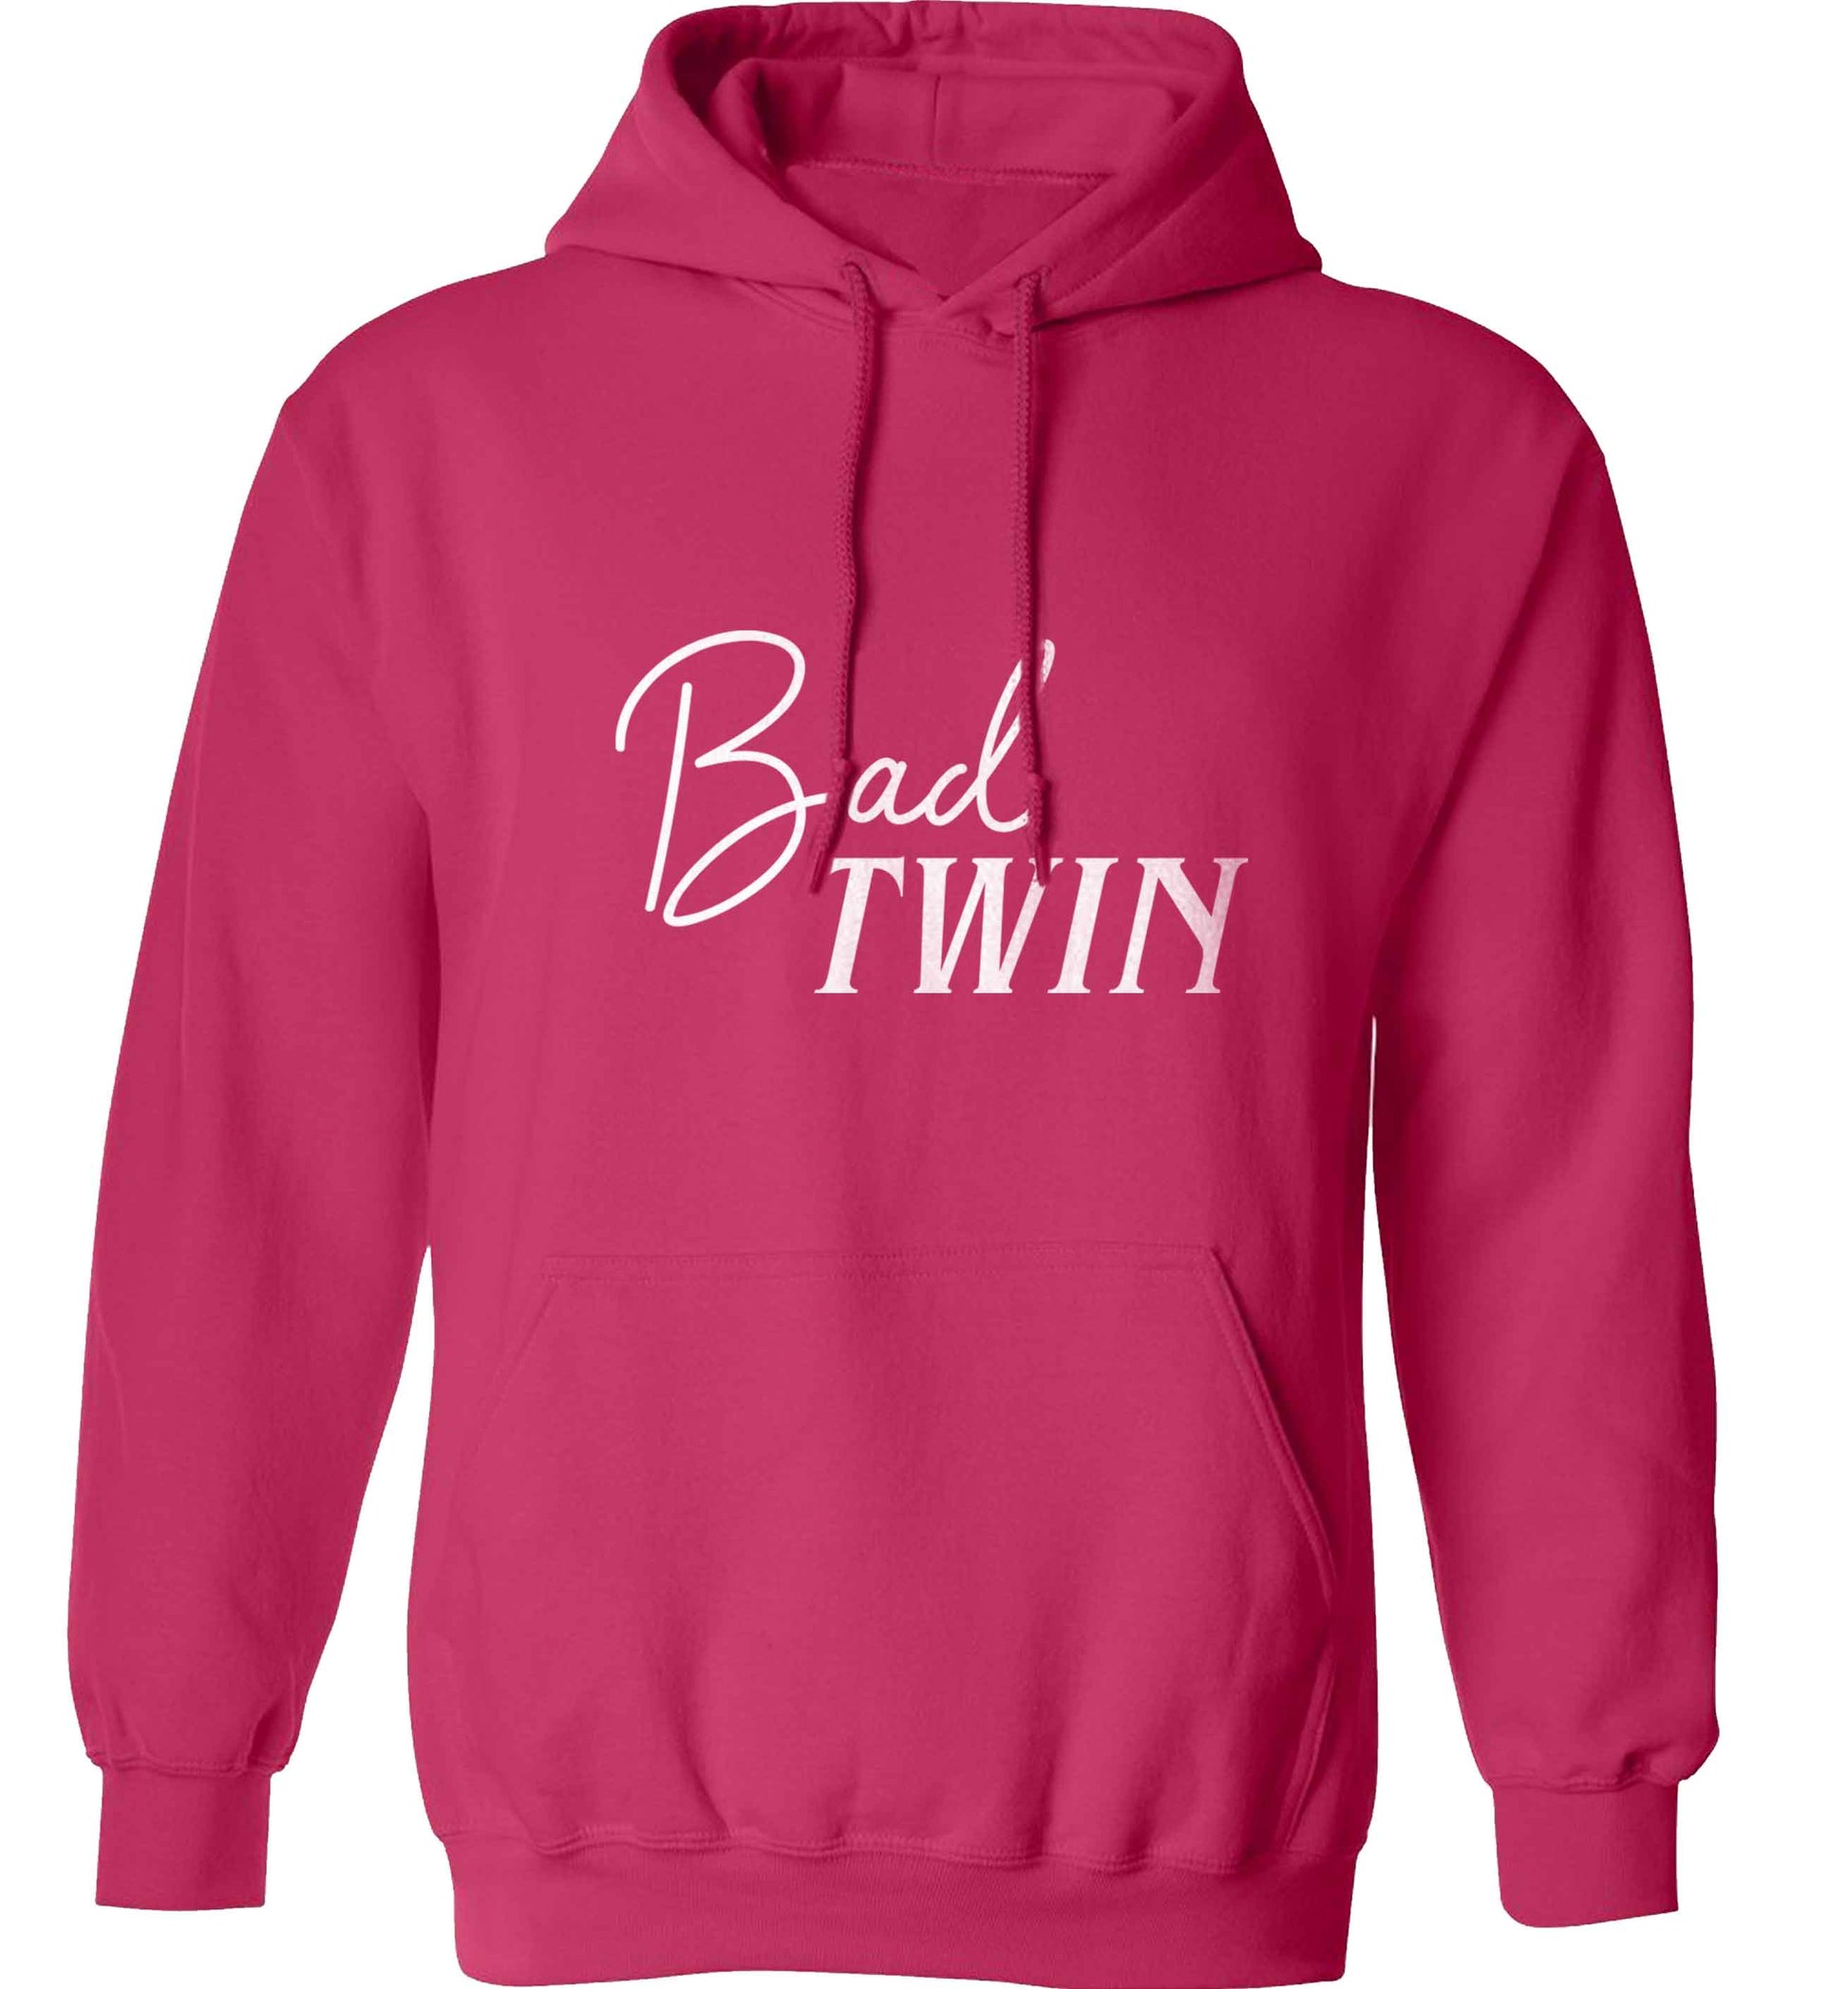 Bad twin adults unisex pink hoodie 2XL